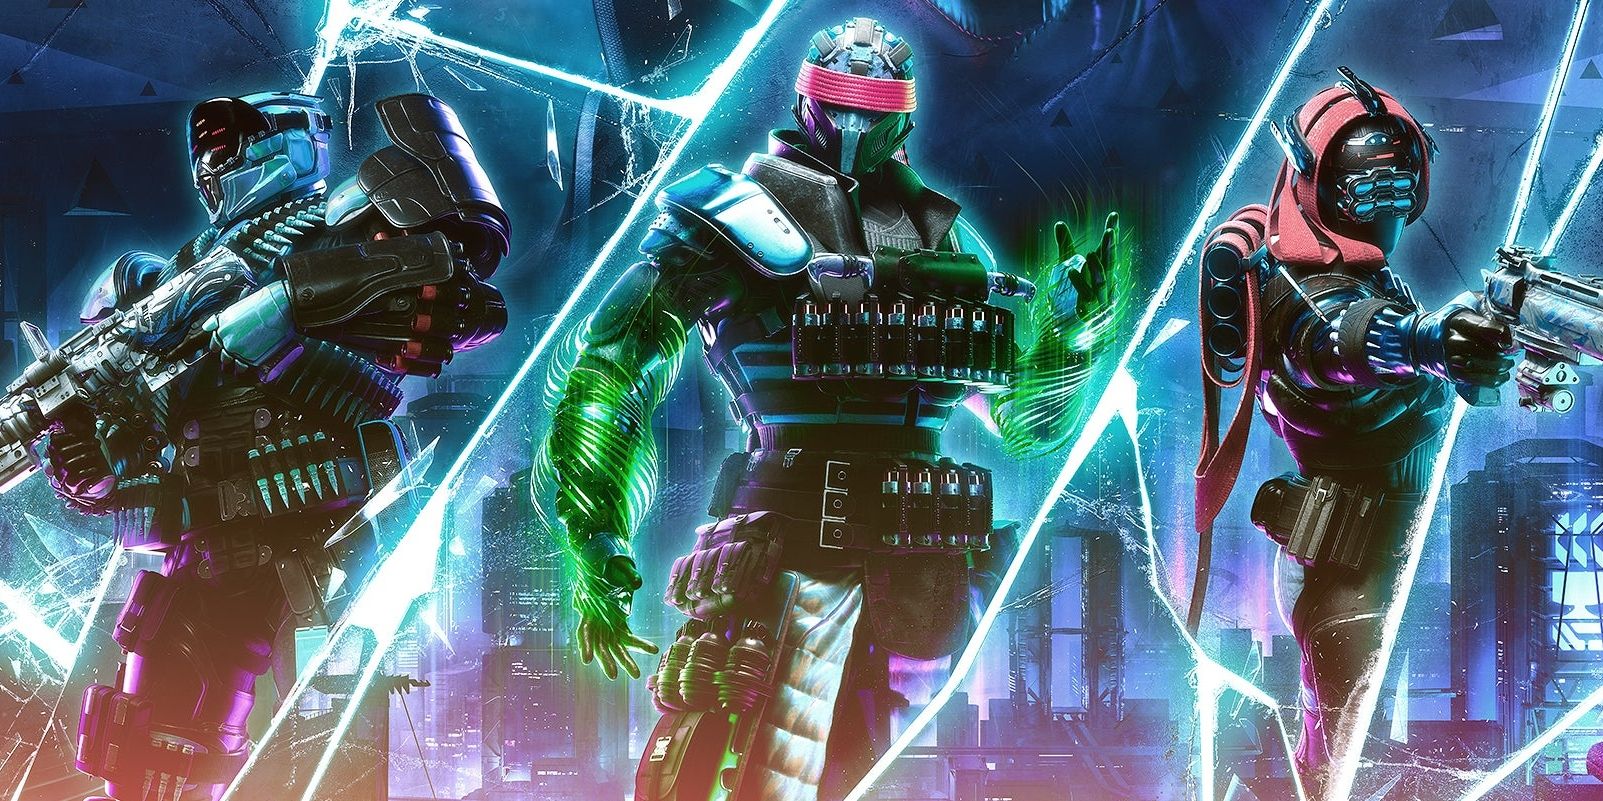 Destiny 2's Guardians posing in Lightfall Neomuna armor. The Titan on the left holds a Machine Gun, while the Hunter on the left aims a Hand Cannon. The Warlock in the middle manipulates the green lines of Strand around his arms.